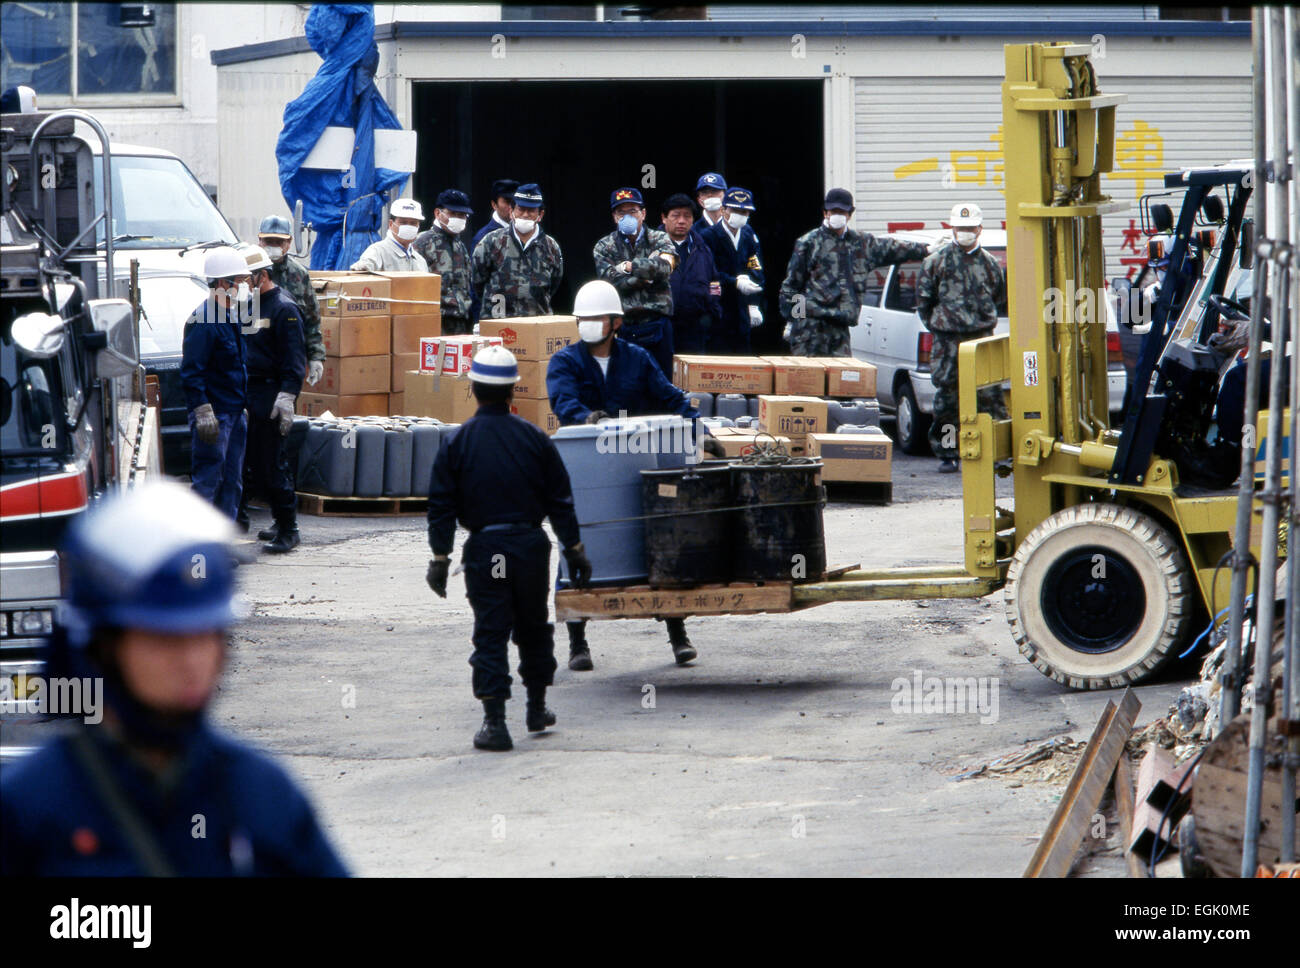 April, 1995, Kamikuisshiki Mura, Japan - Police confiscate explosives, chemical weapons and biological warfare agents during a raid on Aum's facility - No. 2 Satyam - on the foot of Mt. Fuji in April 1995. On the morning of 20 March 1995, cult members released sarin in a coordinated attack on five trains in the Tokyo subway system, killing 13 commuters, seriously injuring 54 and affecting 980 more. Some estimates claim as many as 6,000 people were injured by the sarin. © Haruyoshi Yamaguchi/AFLO/Alamy Live News Stock Photo